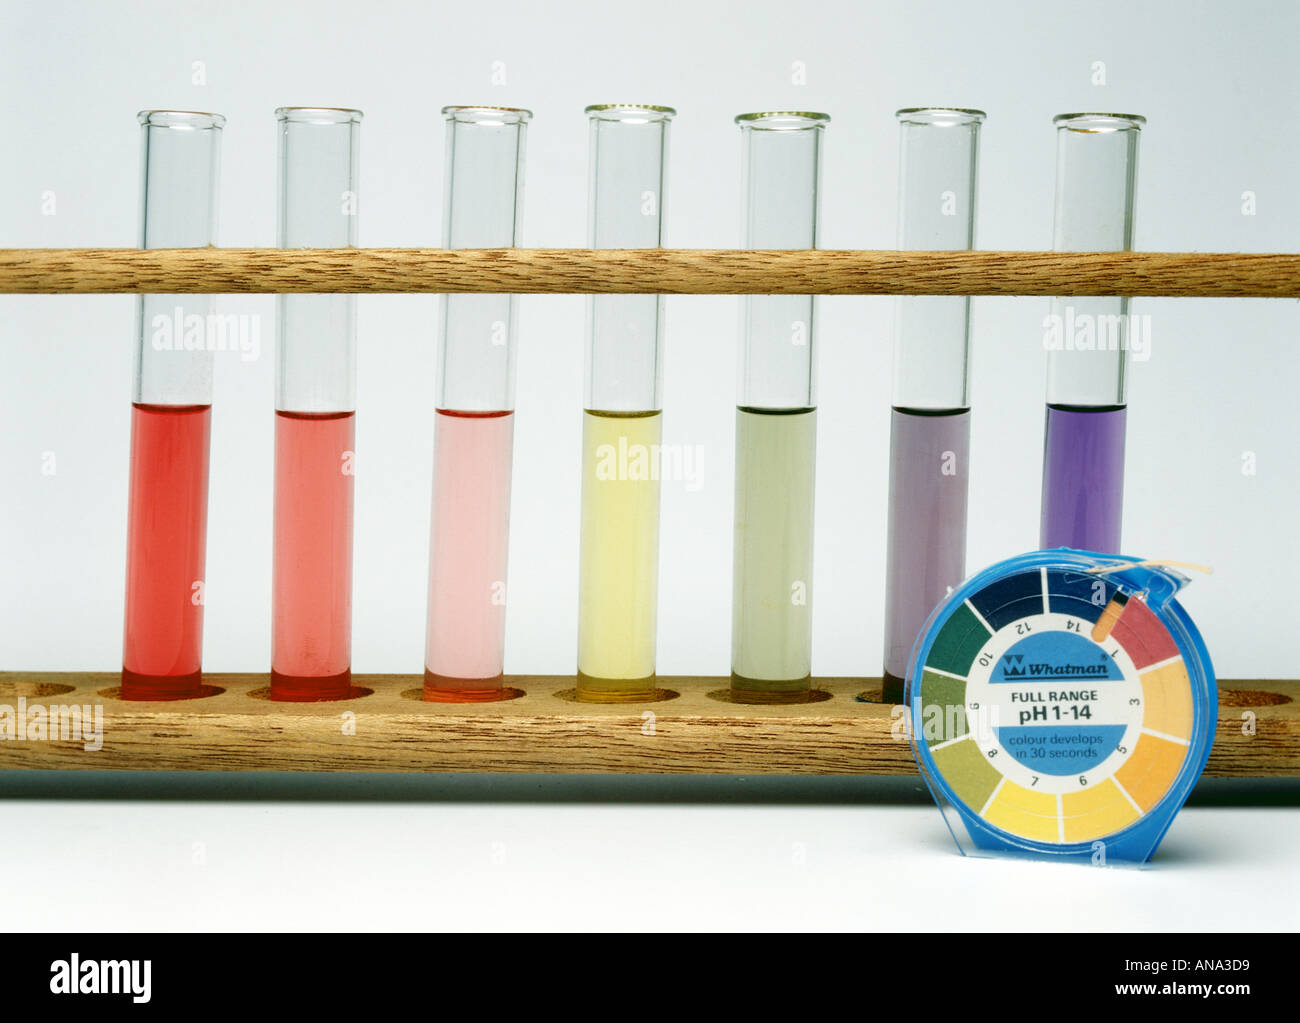 pH indicator paper and test tubes ranging from acid red to alkaline blue Stock Photo